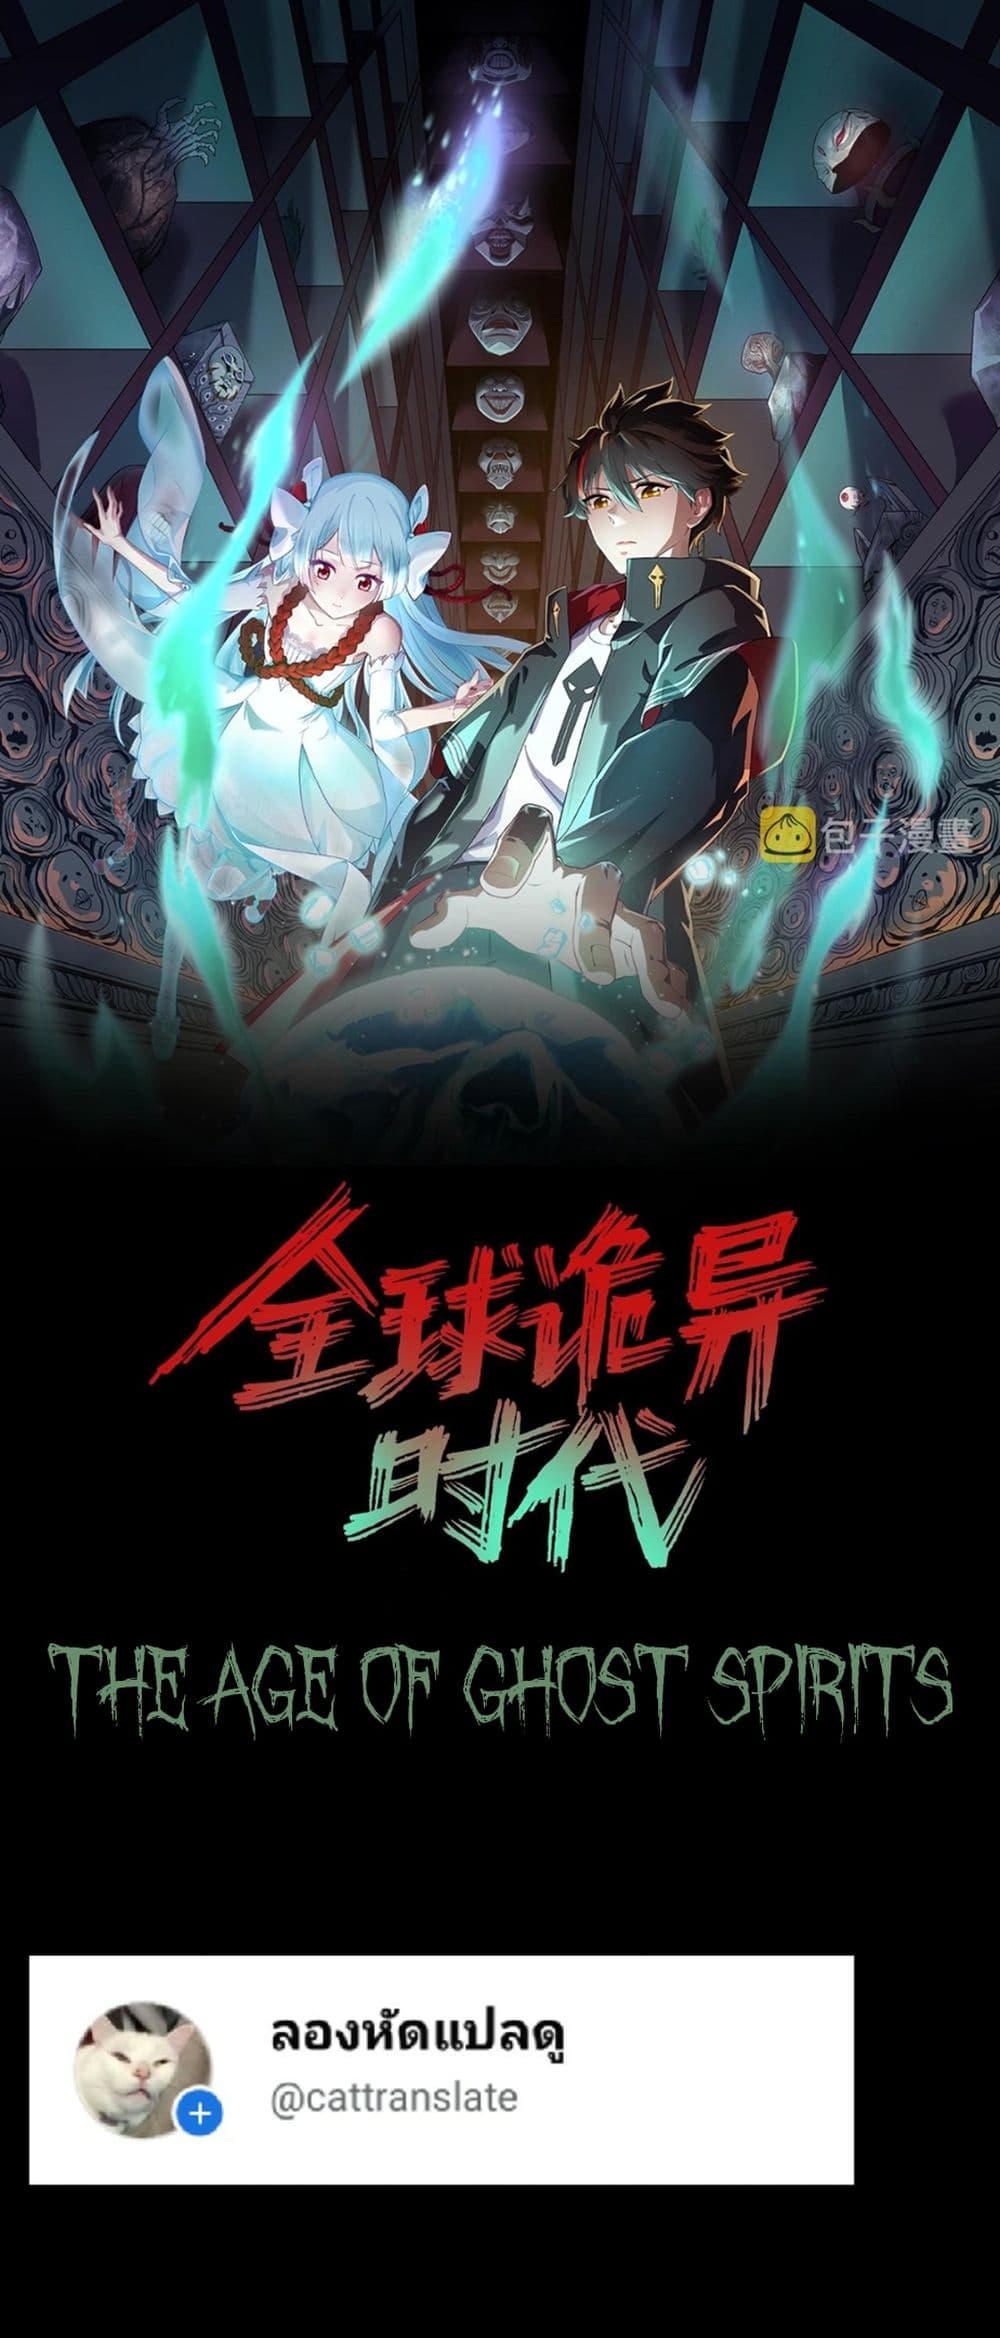 The Age of Ghost Spirits à¸à¸­à¸à¸à¸µà¹ 5 (1)